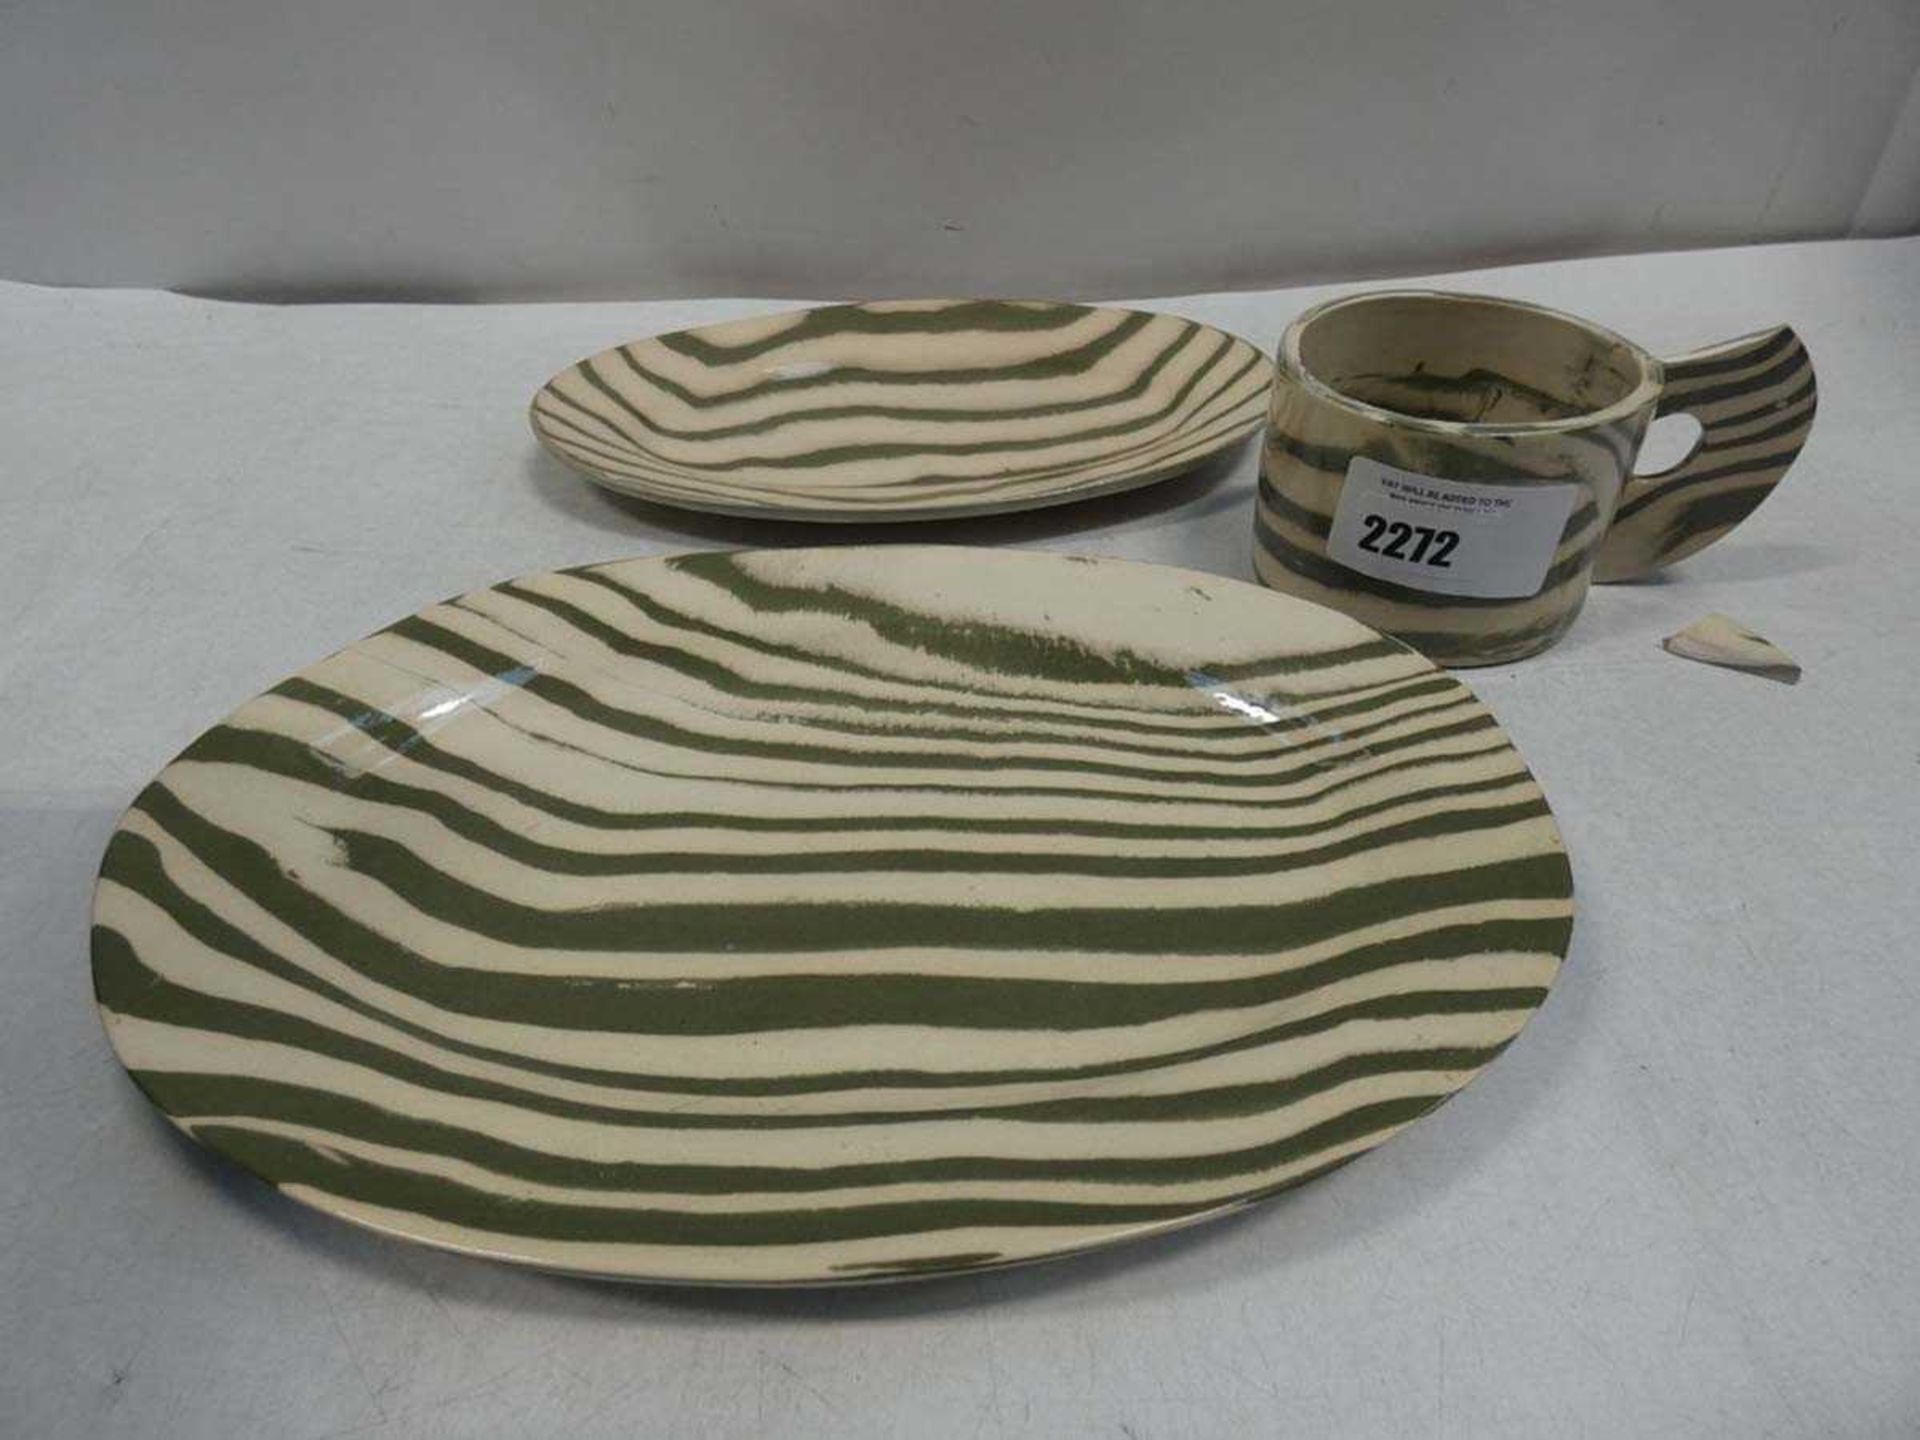 +VAT Henry Holland green and cream mug (a/f chipped handle) and 2 plates